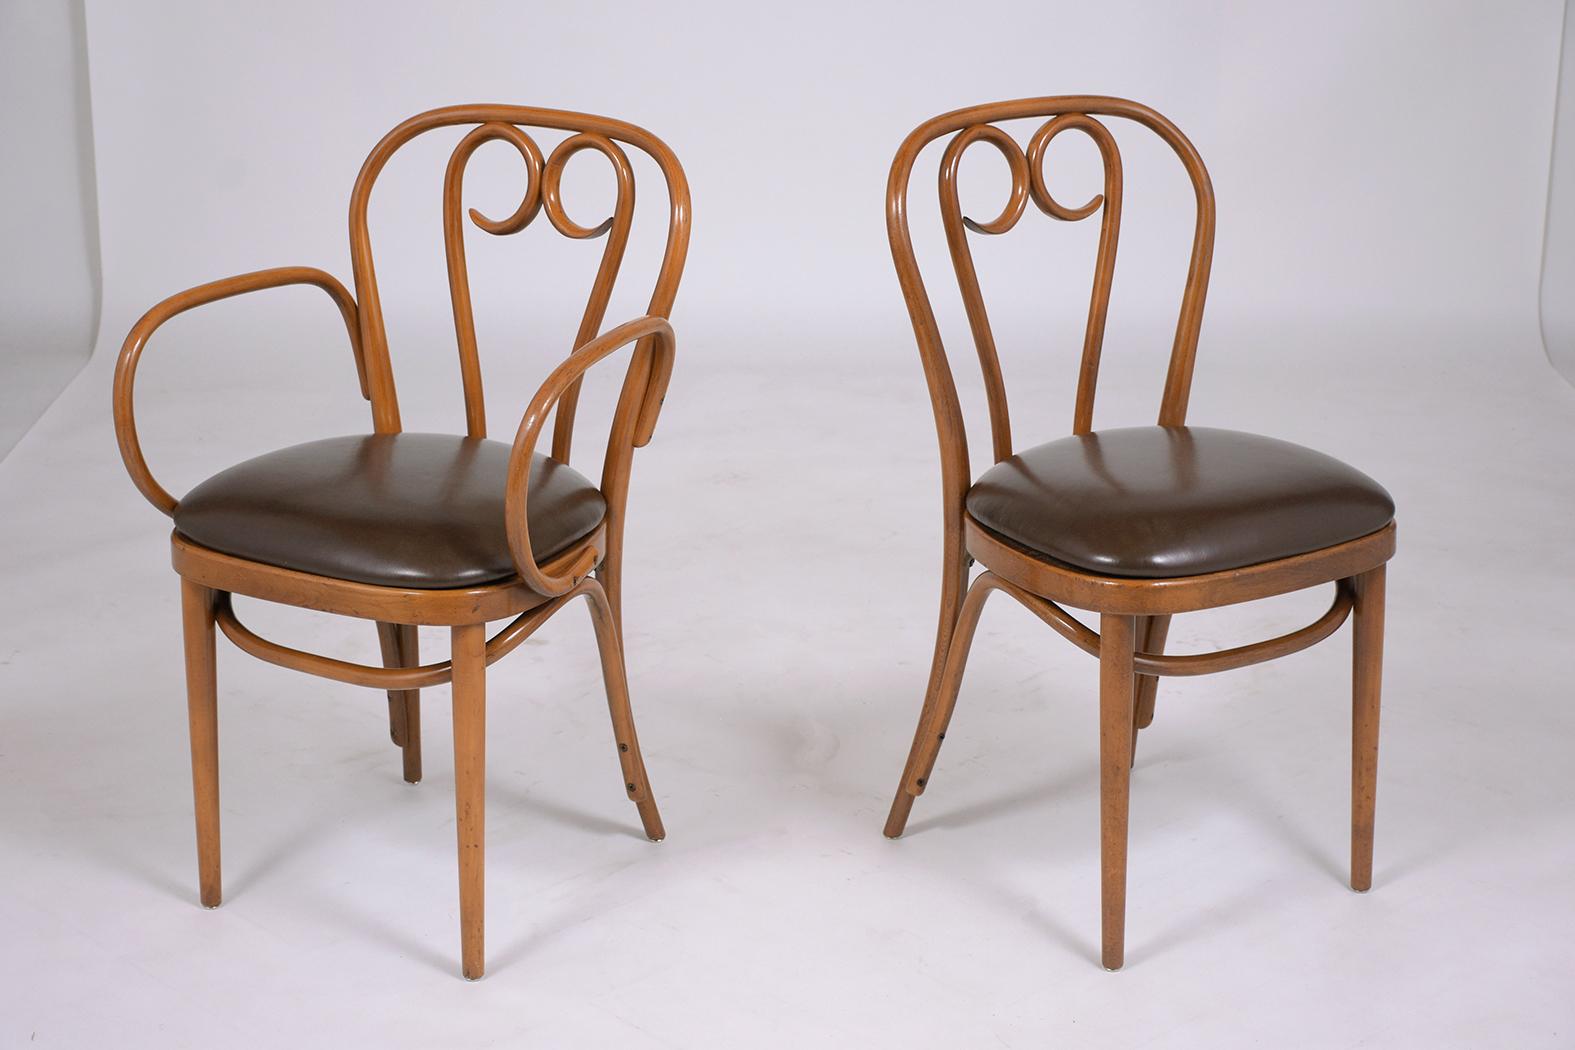 Art-Deco Thonet Bentwood Leather Dining Chairs with Walnut Finish - Set of Six For Sale 4